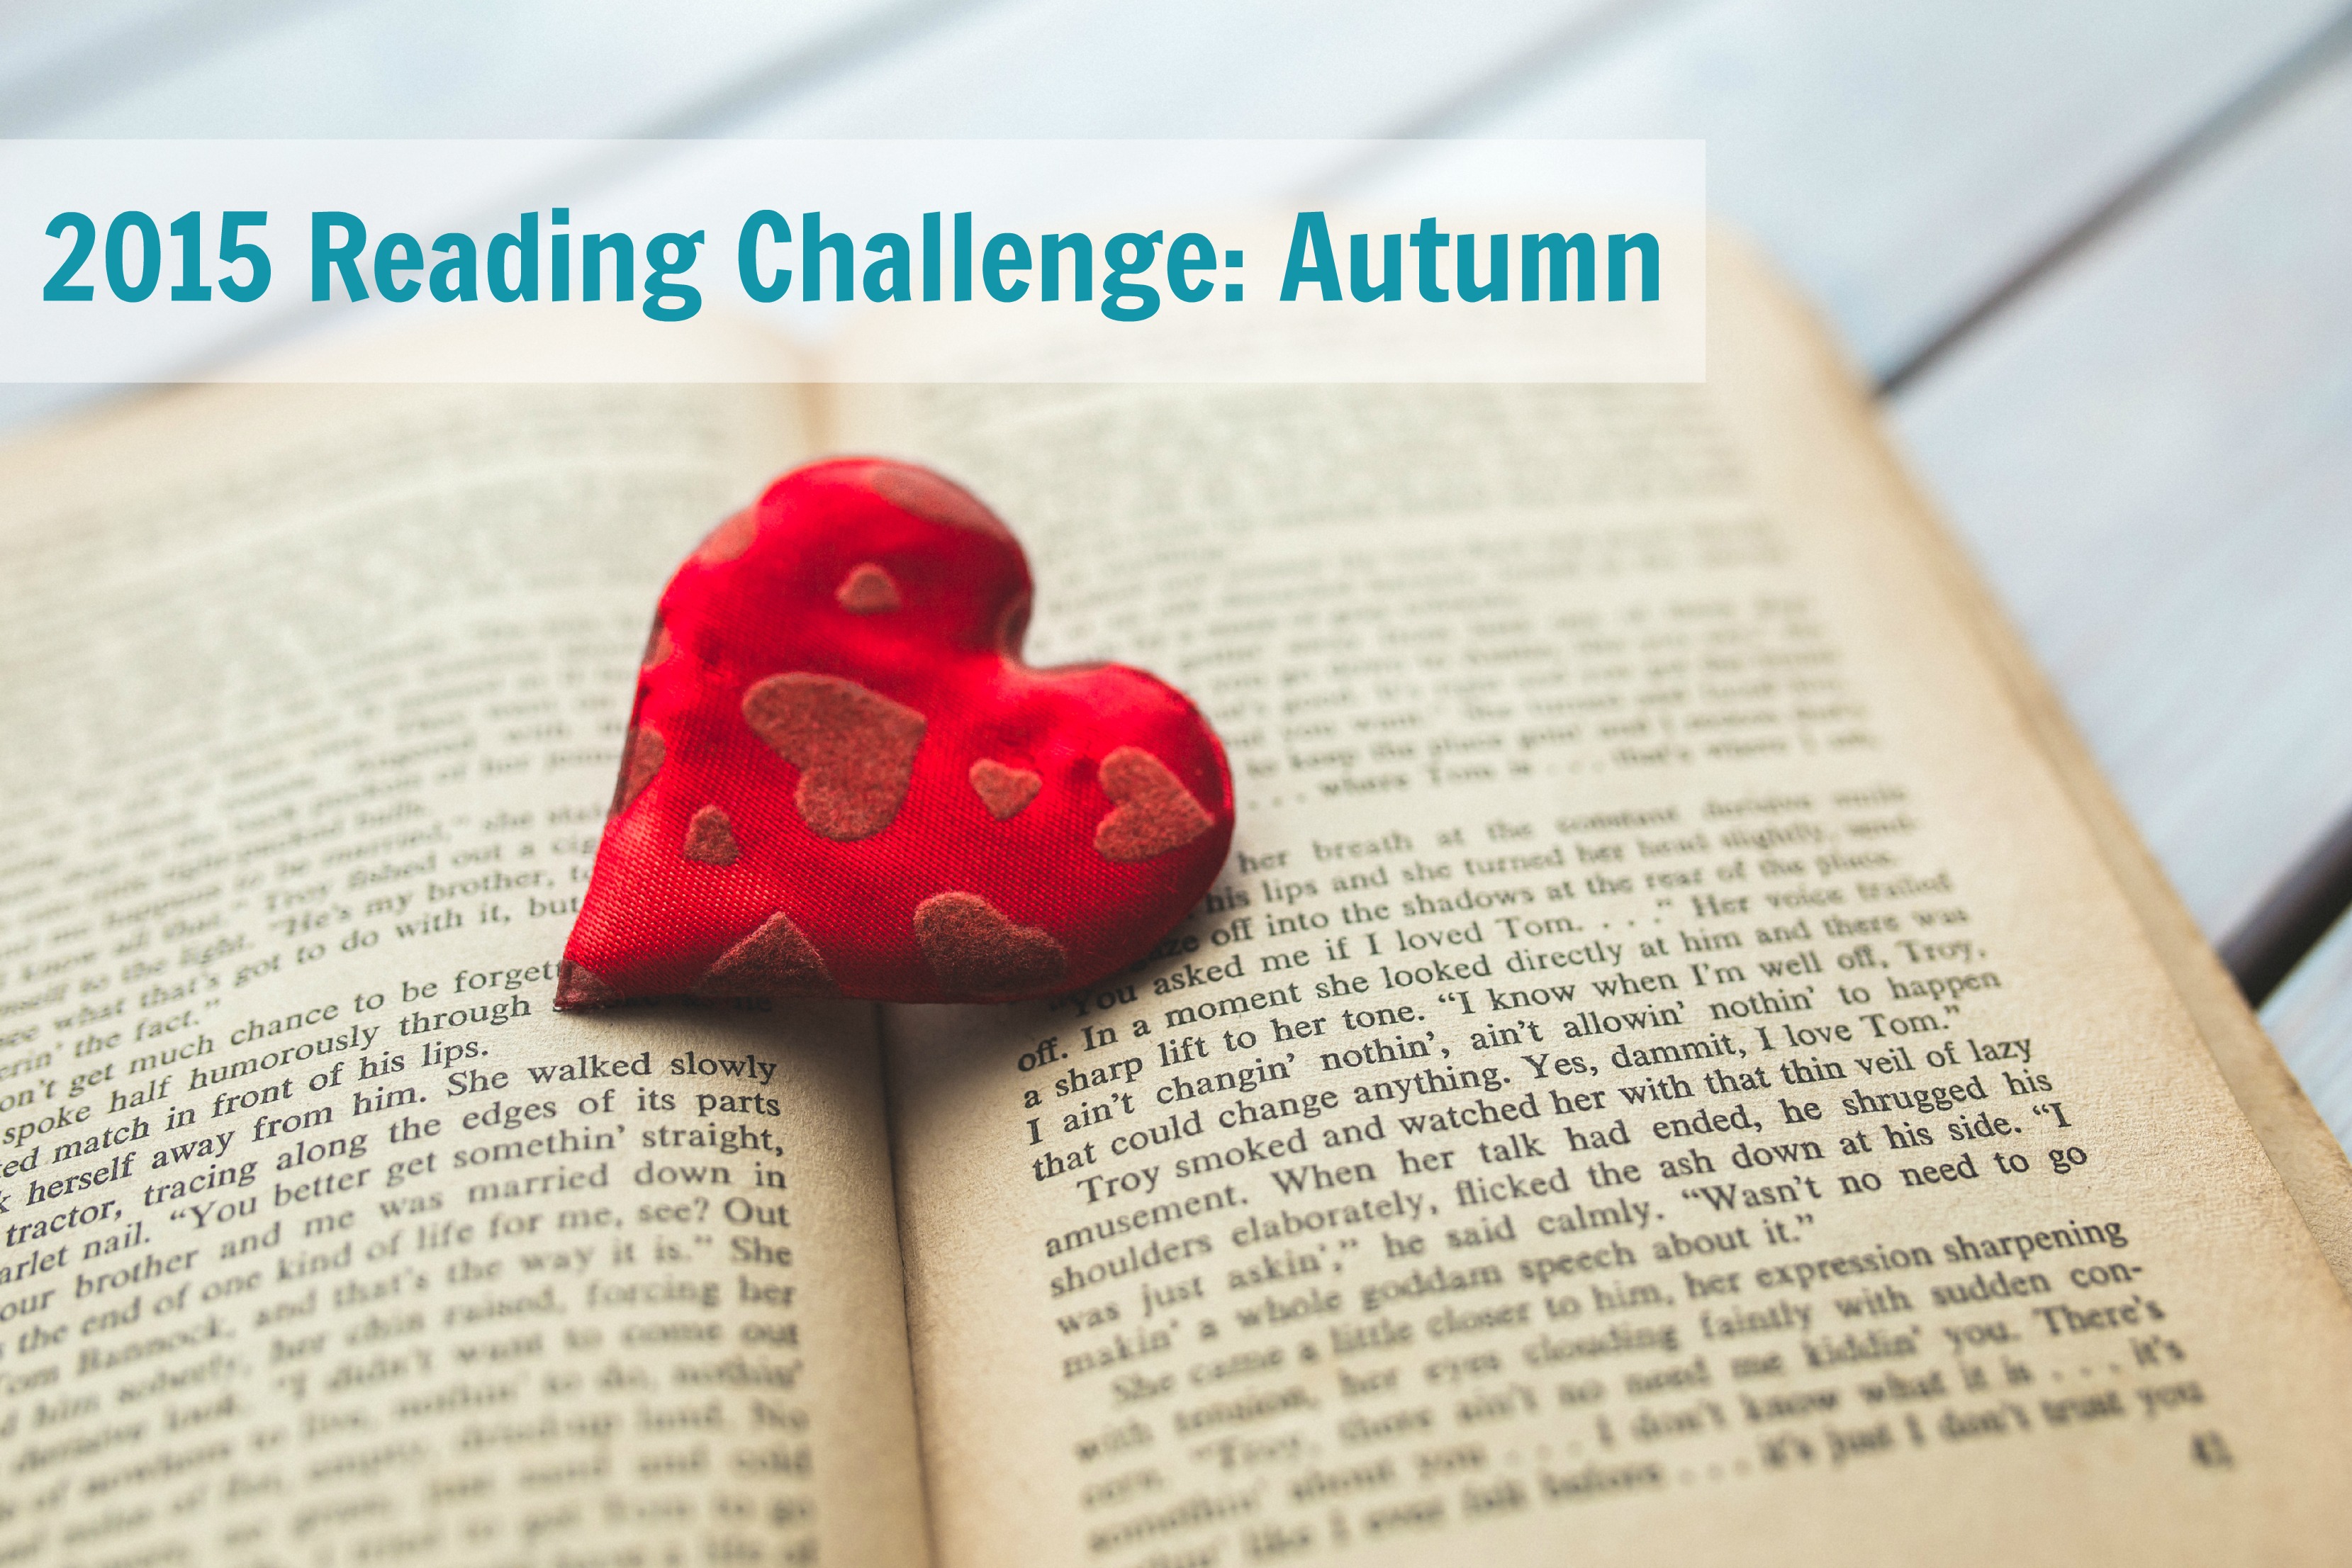 Review of 10 books read during Autumn